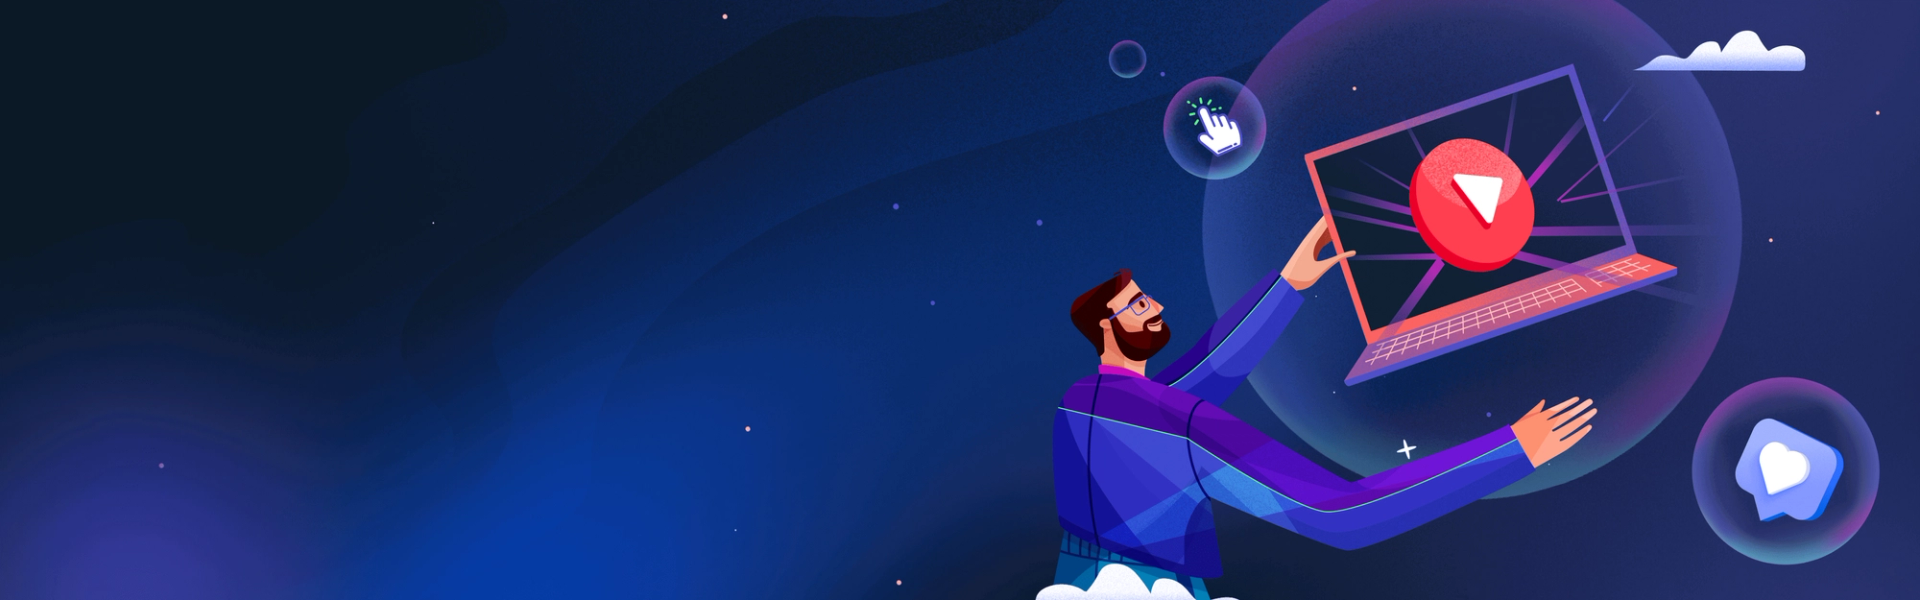 10 Great Examples of Animation on Websites